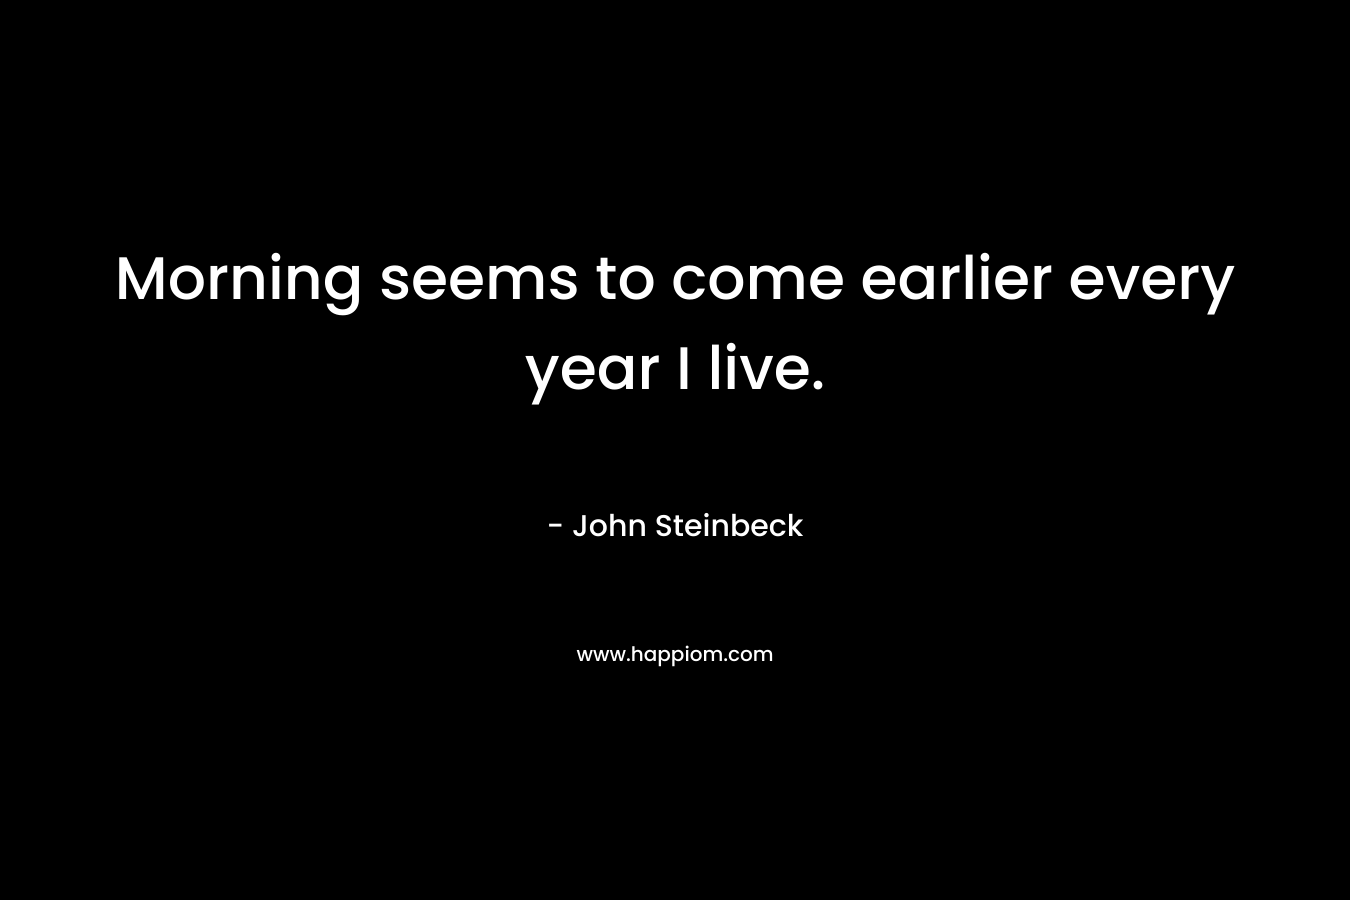 Morning seems to come earlier every year I live. – John Steinbeck